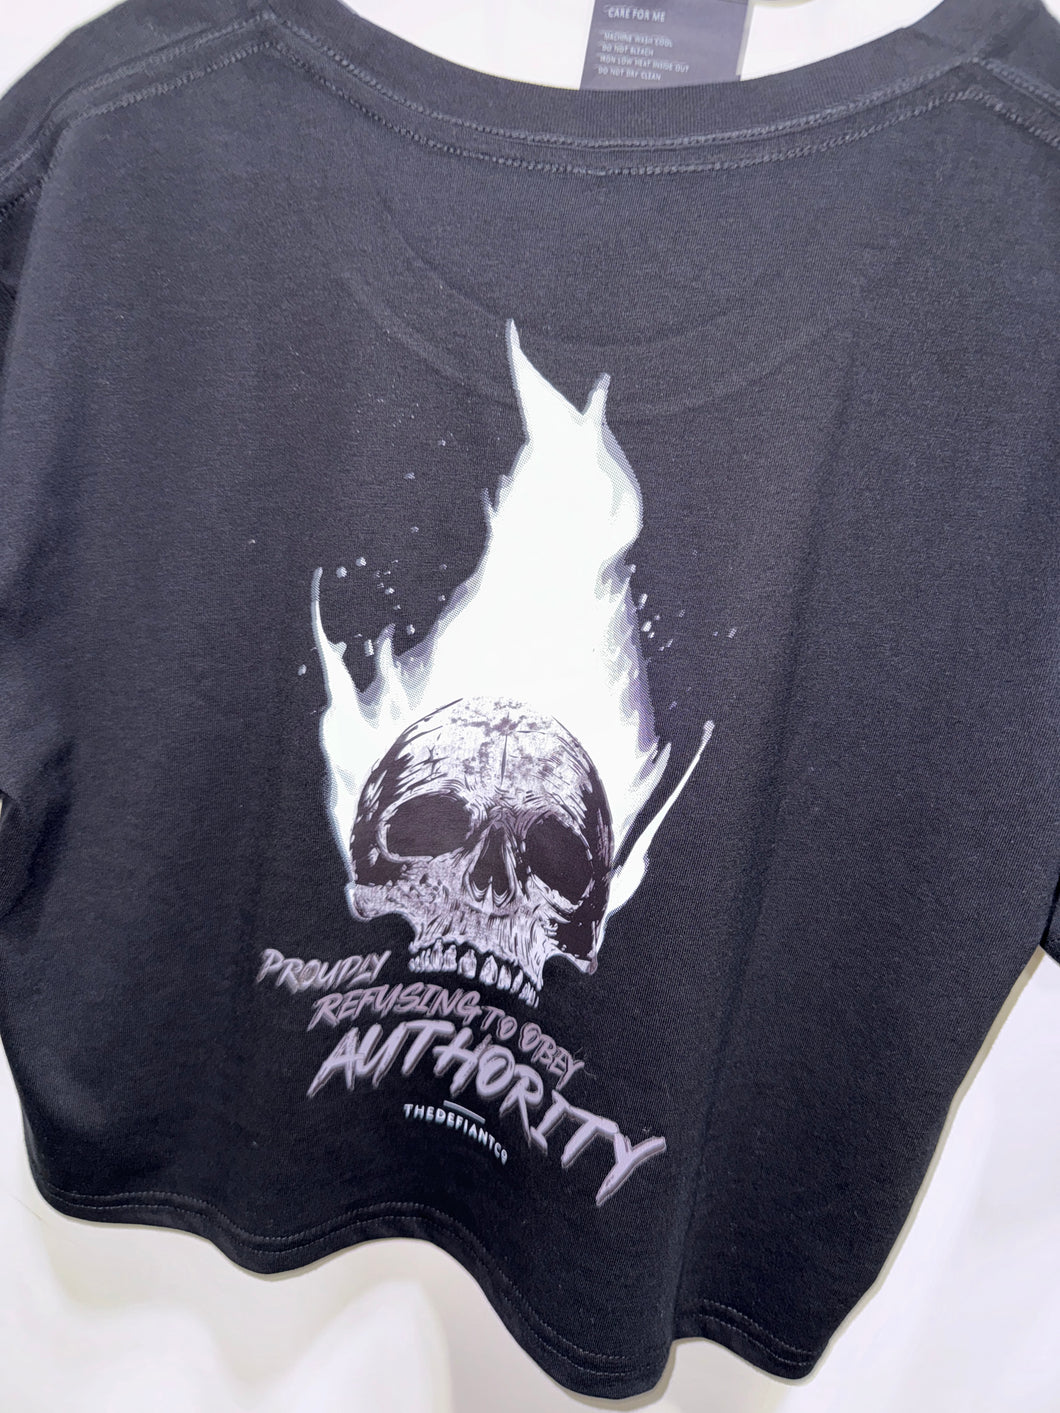 A photo showing the back of a female fit cropped t-shirt.  The shirt has a big bold print on the back of a skull in flames. Underneath the slull is the defiant tag line 'Proudly Refusing To Obey Authority' with the The Defiant Co logo under that. The shirt is black in colour.